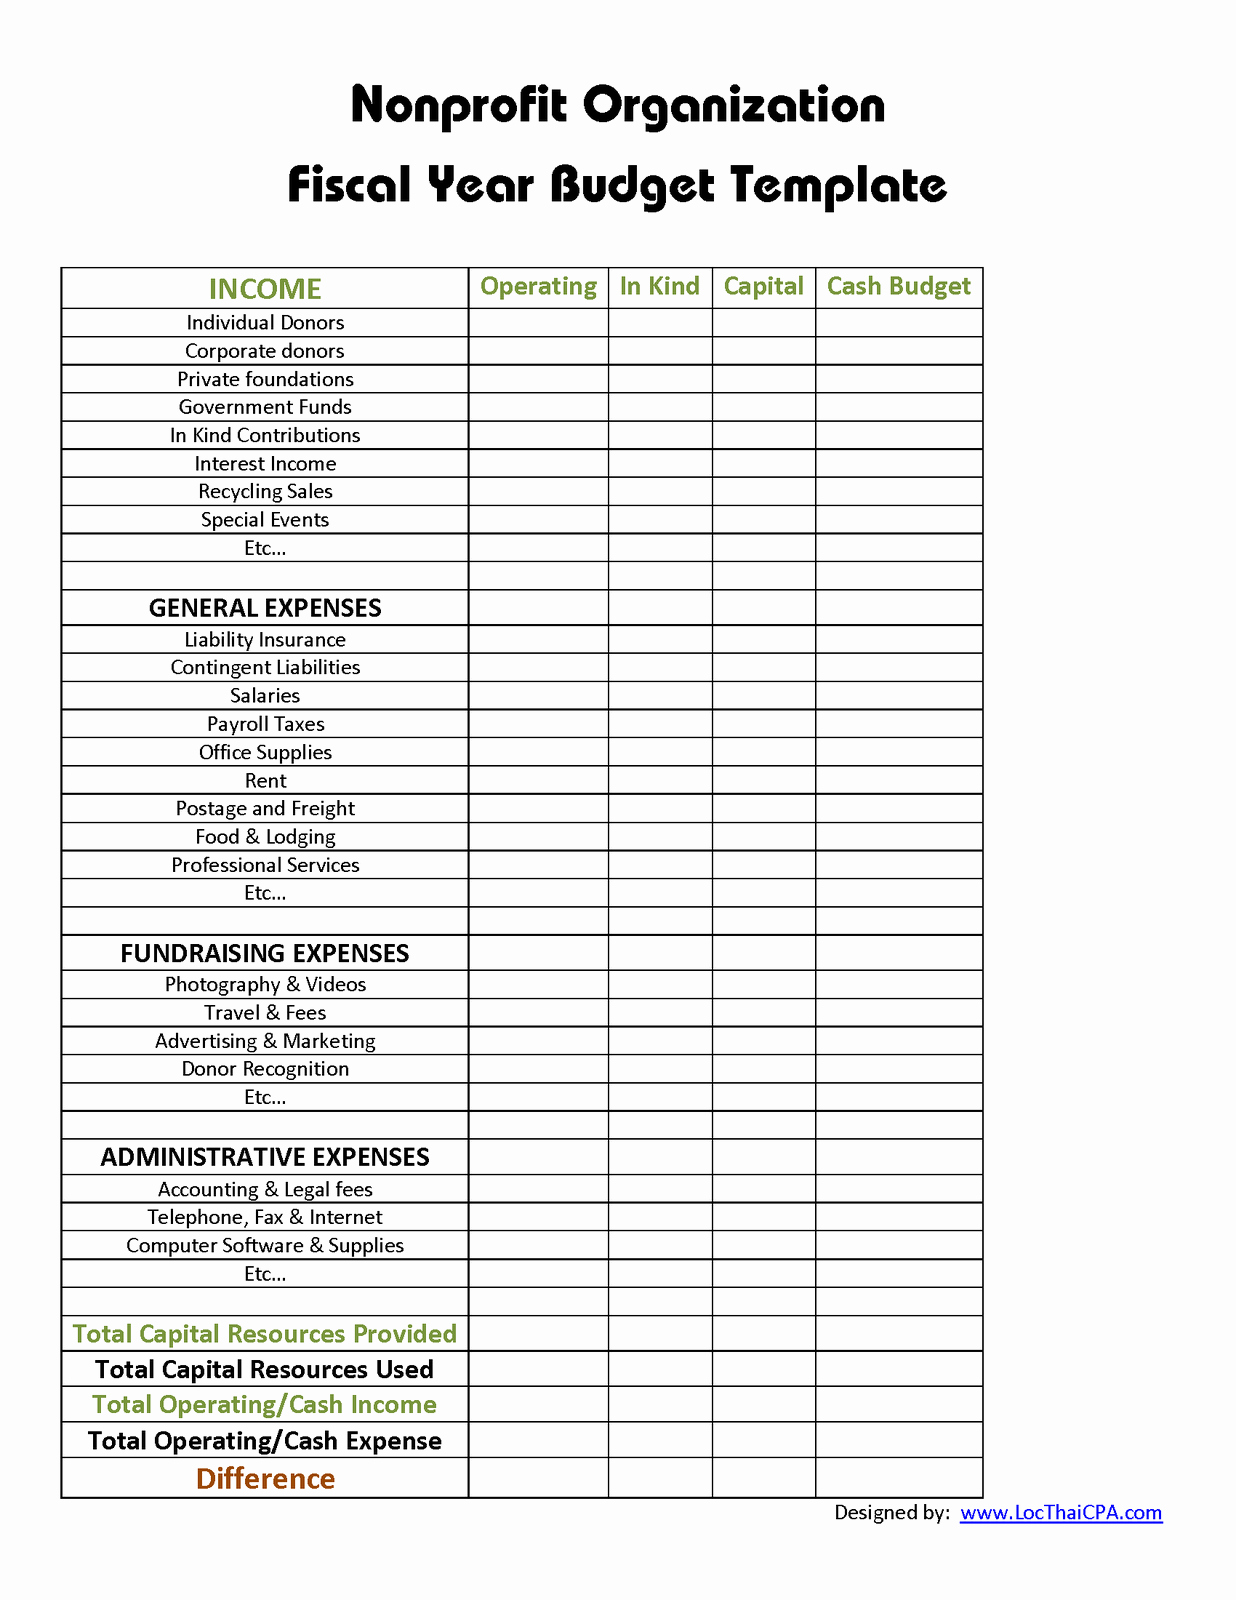 Nonprofit Operating Budget Template New Loc Thai Cpa Pc Nonprofit organization Fiscal Year